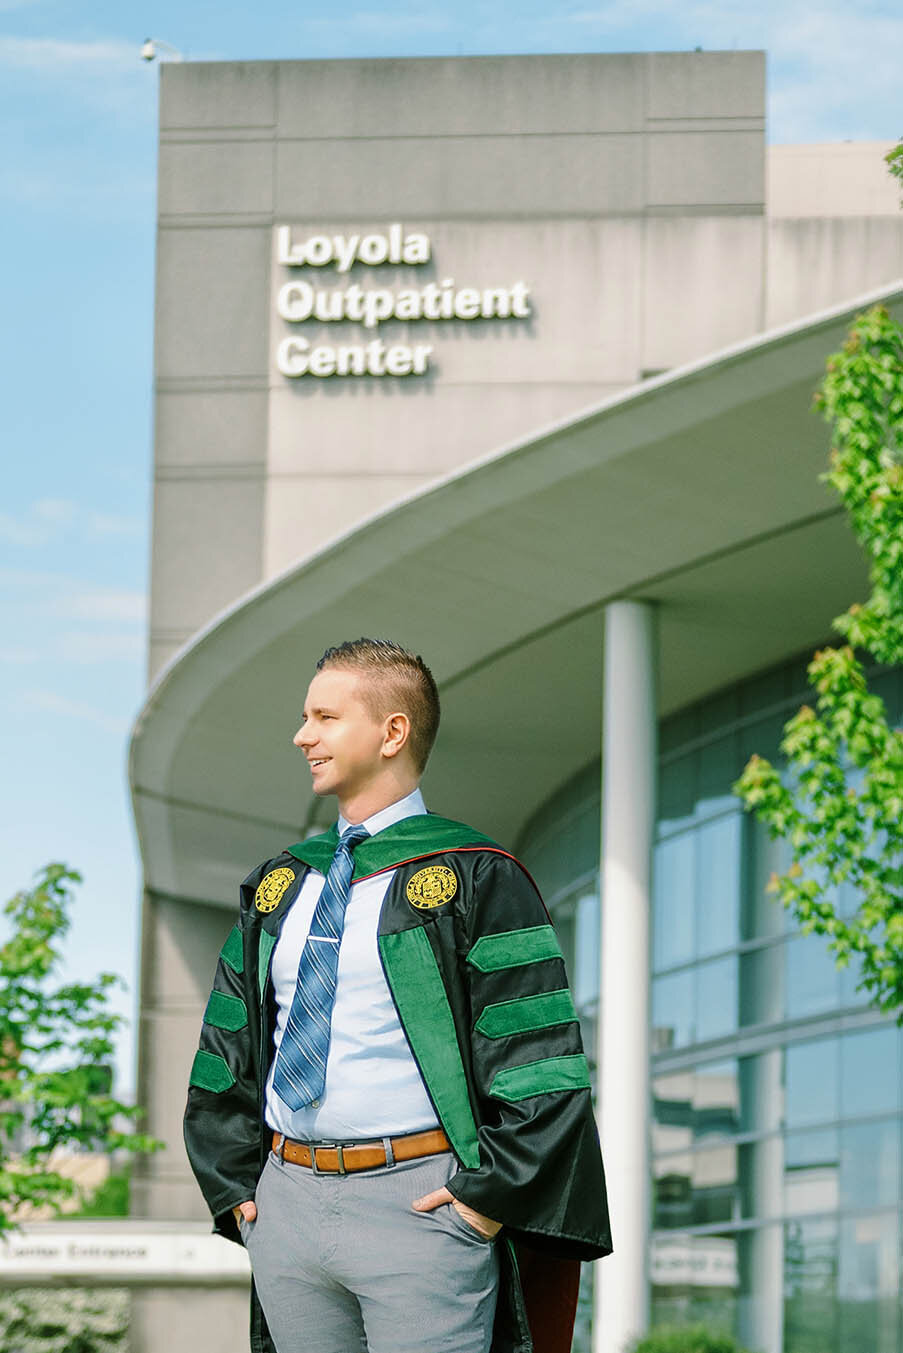 Medical school graduate standing in front of Loyola University Chicago's outpatient center